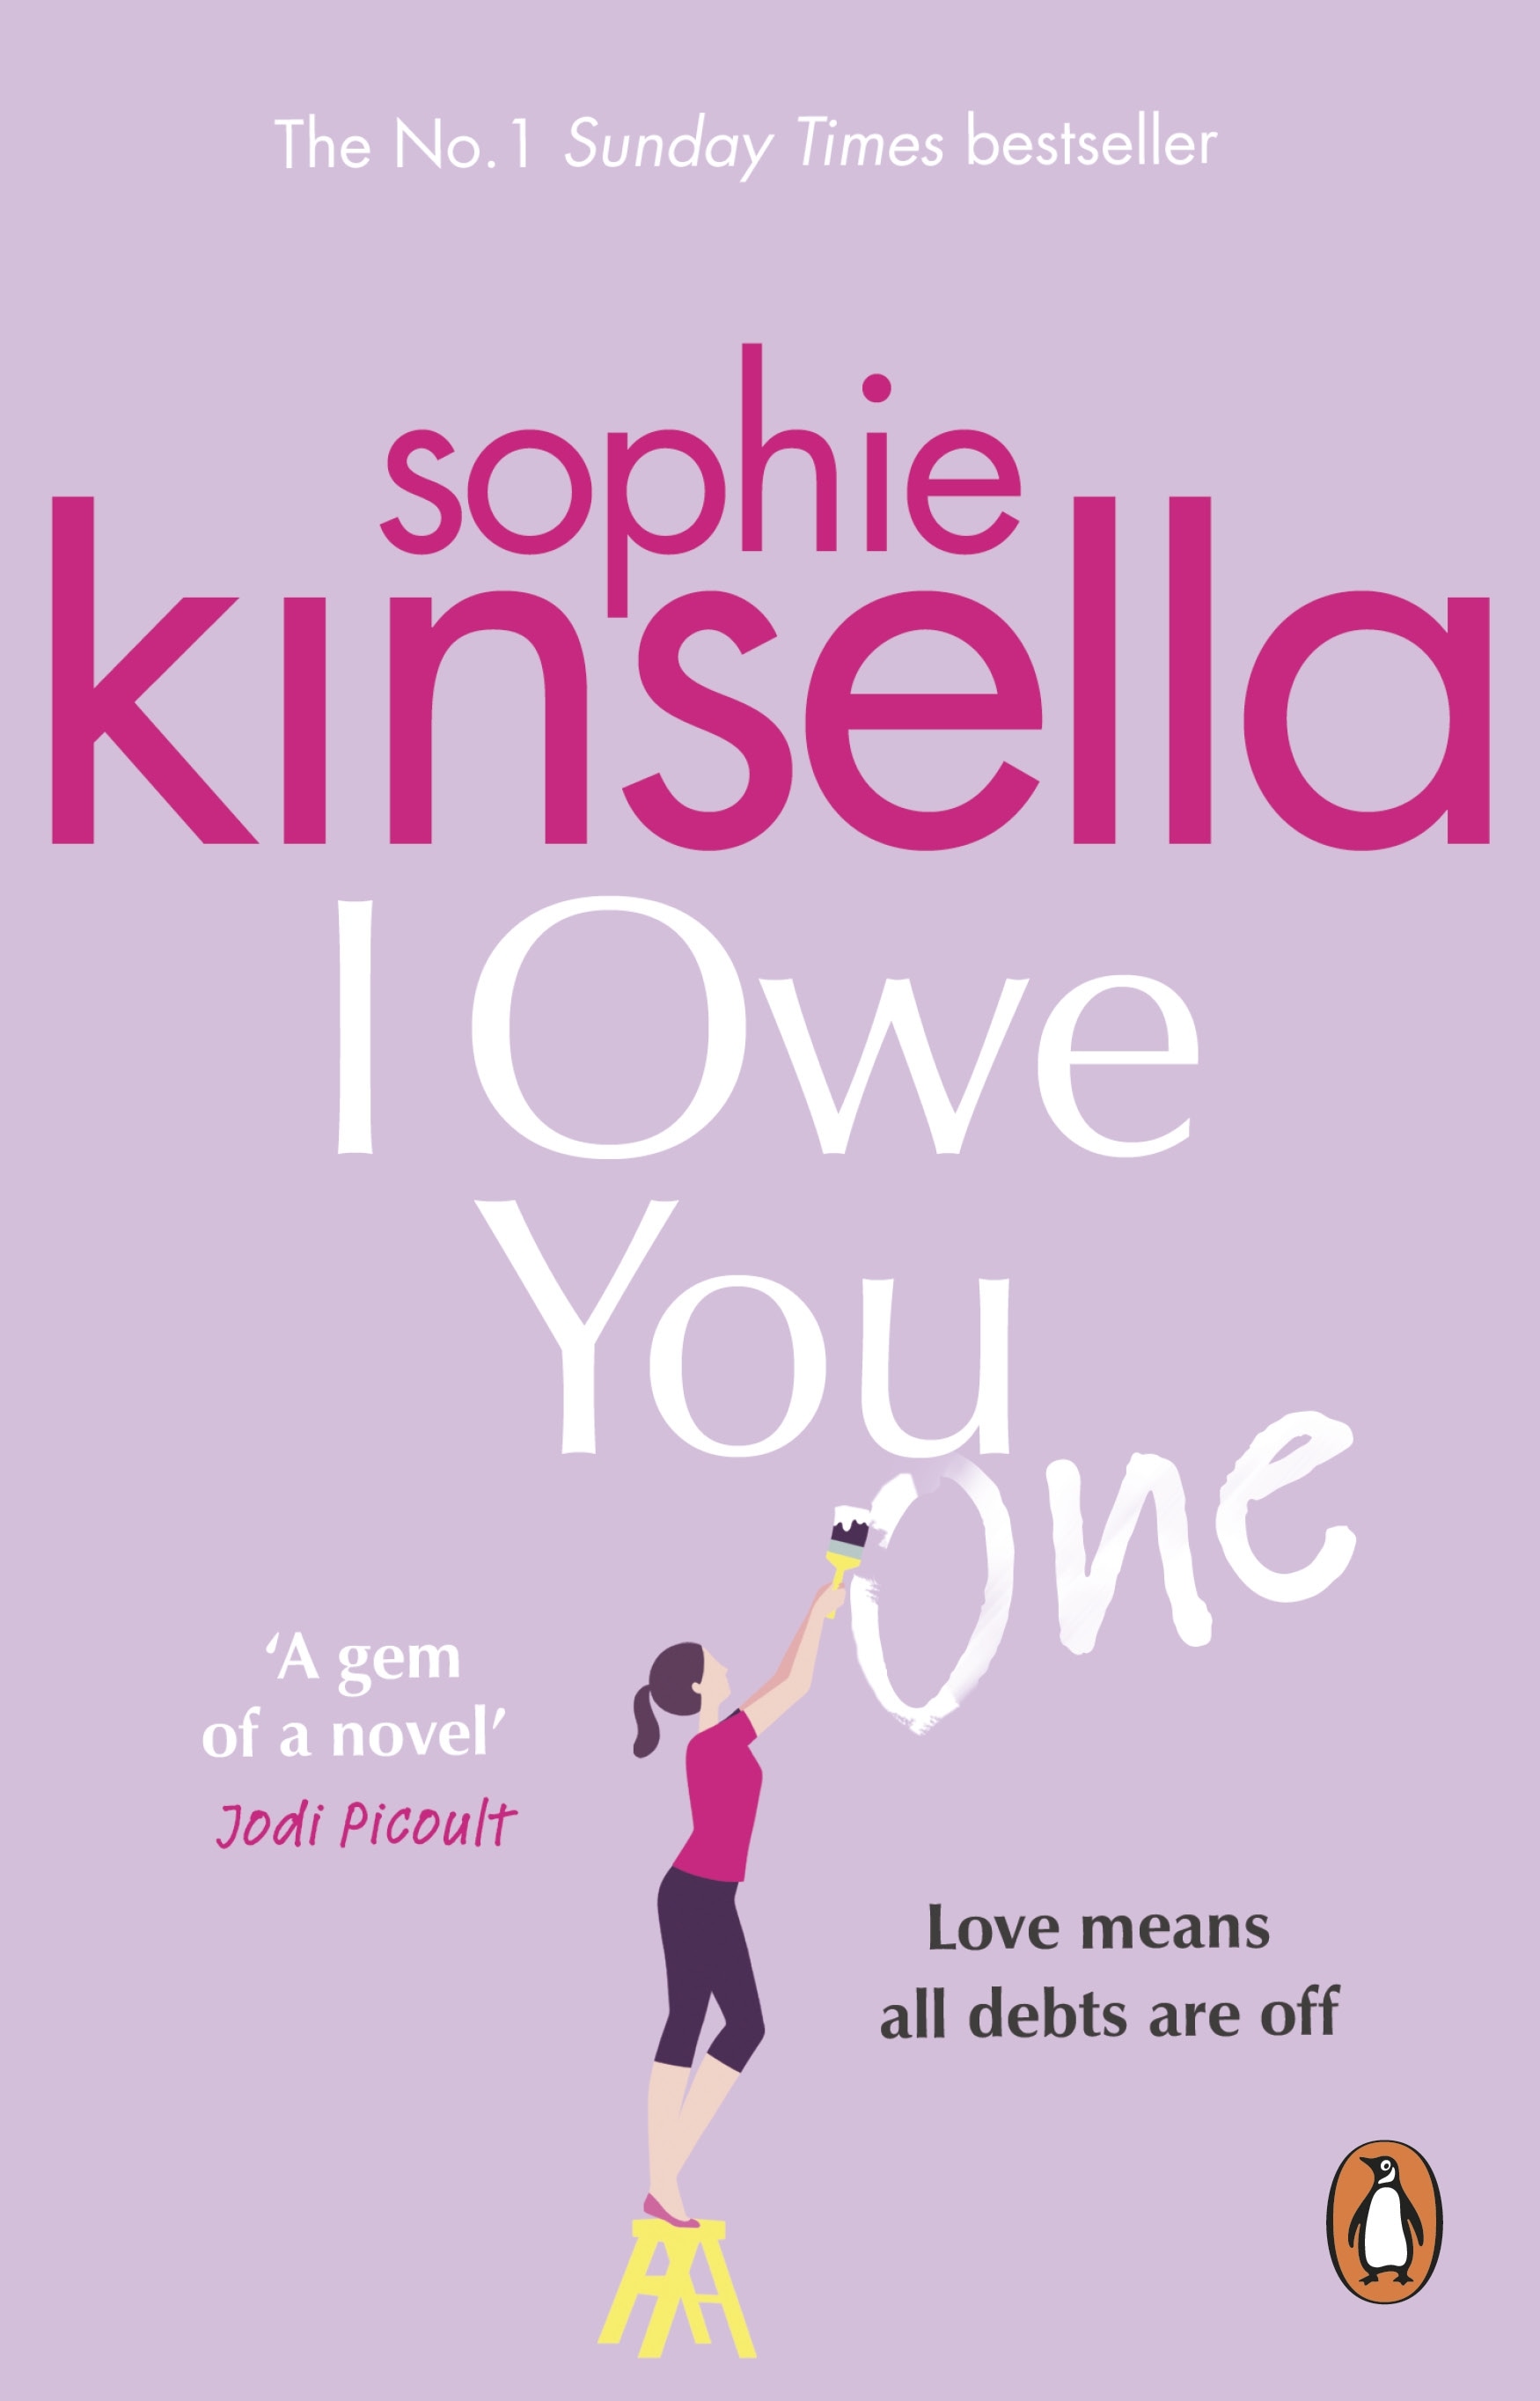 Book “I Owe You One” by Sophie Kinsella — June 27, 2019